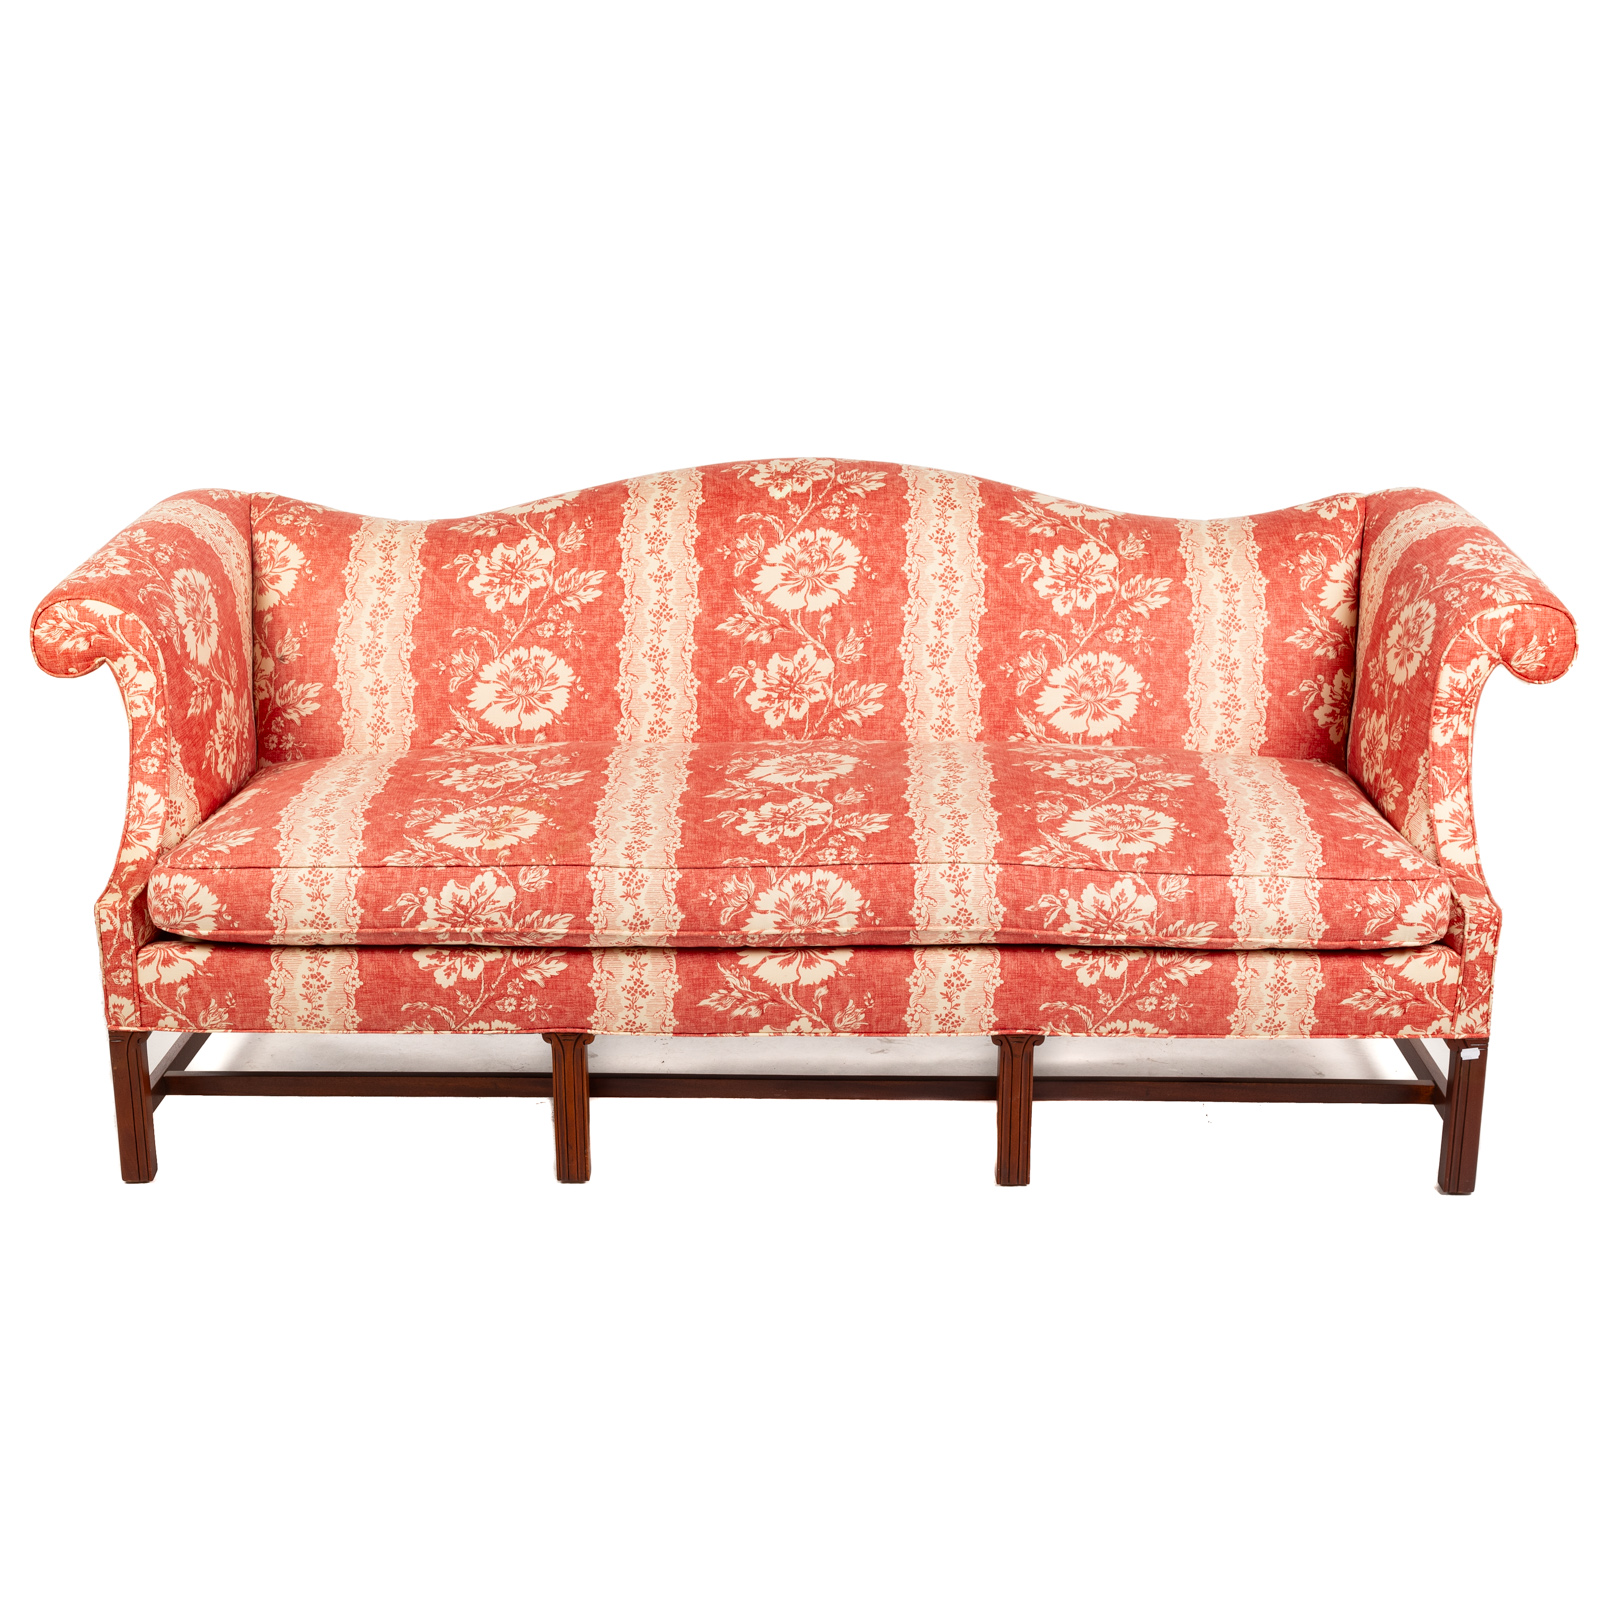 SOUTHWOOD CHIPPENDALE STYLE UPHOLSTERED 2eae8f